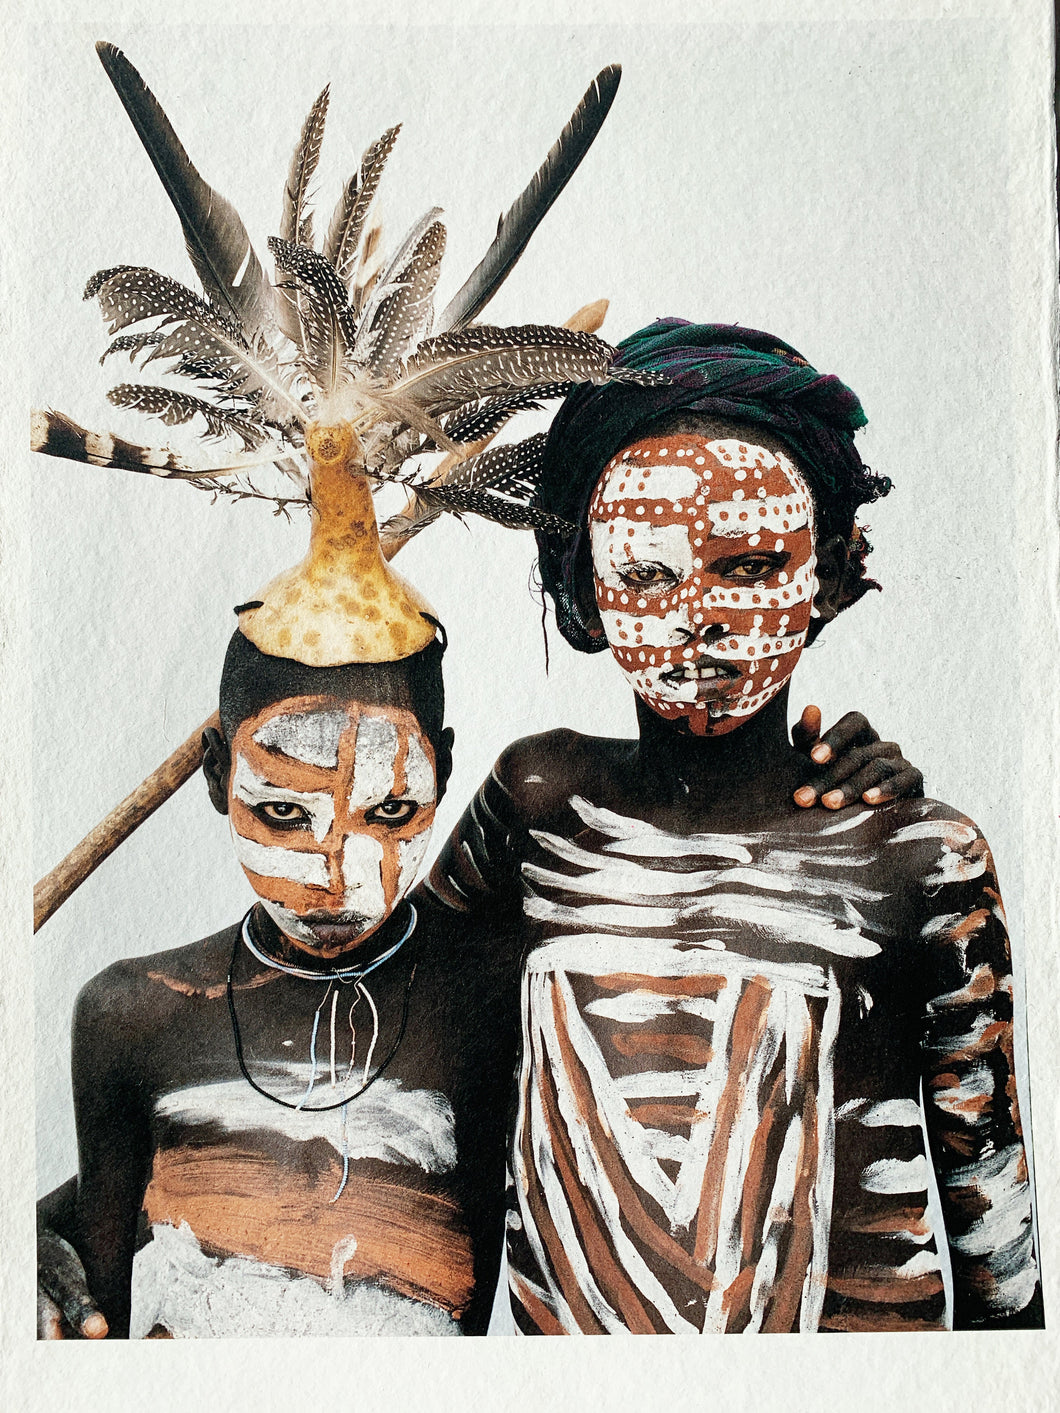 Two Hats by Jean-Michel Voge, Tribal Children Ethiopia, Africa, Photography on Handmade Japanese Paper